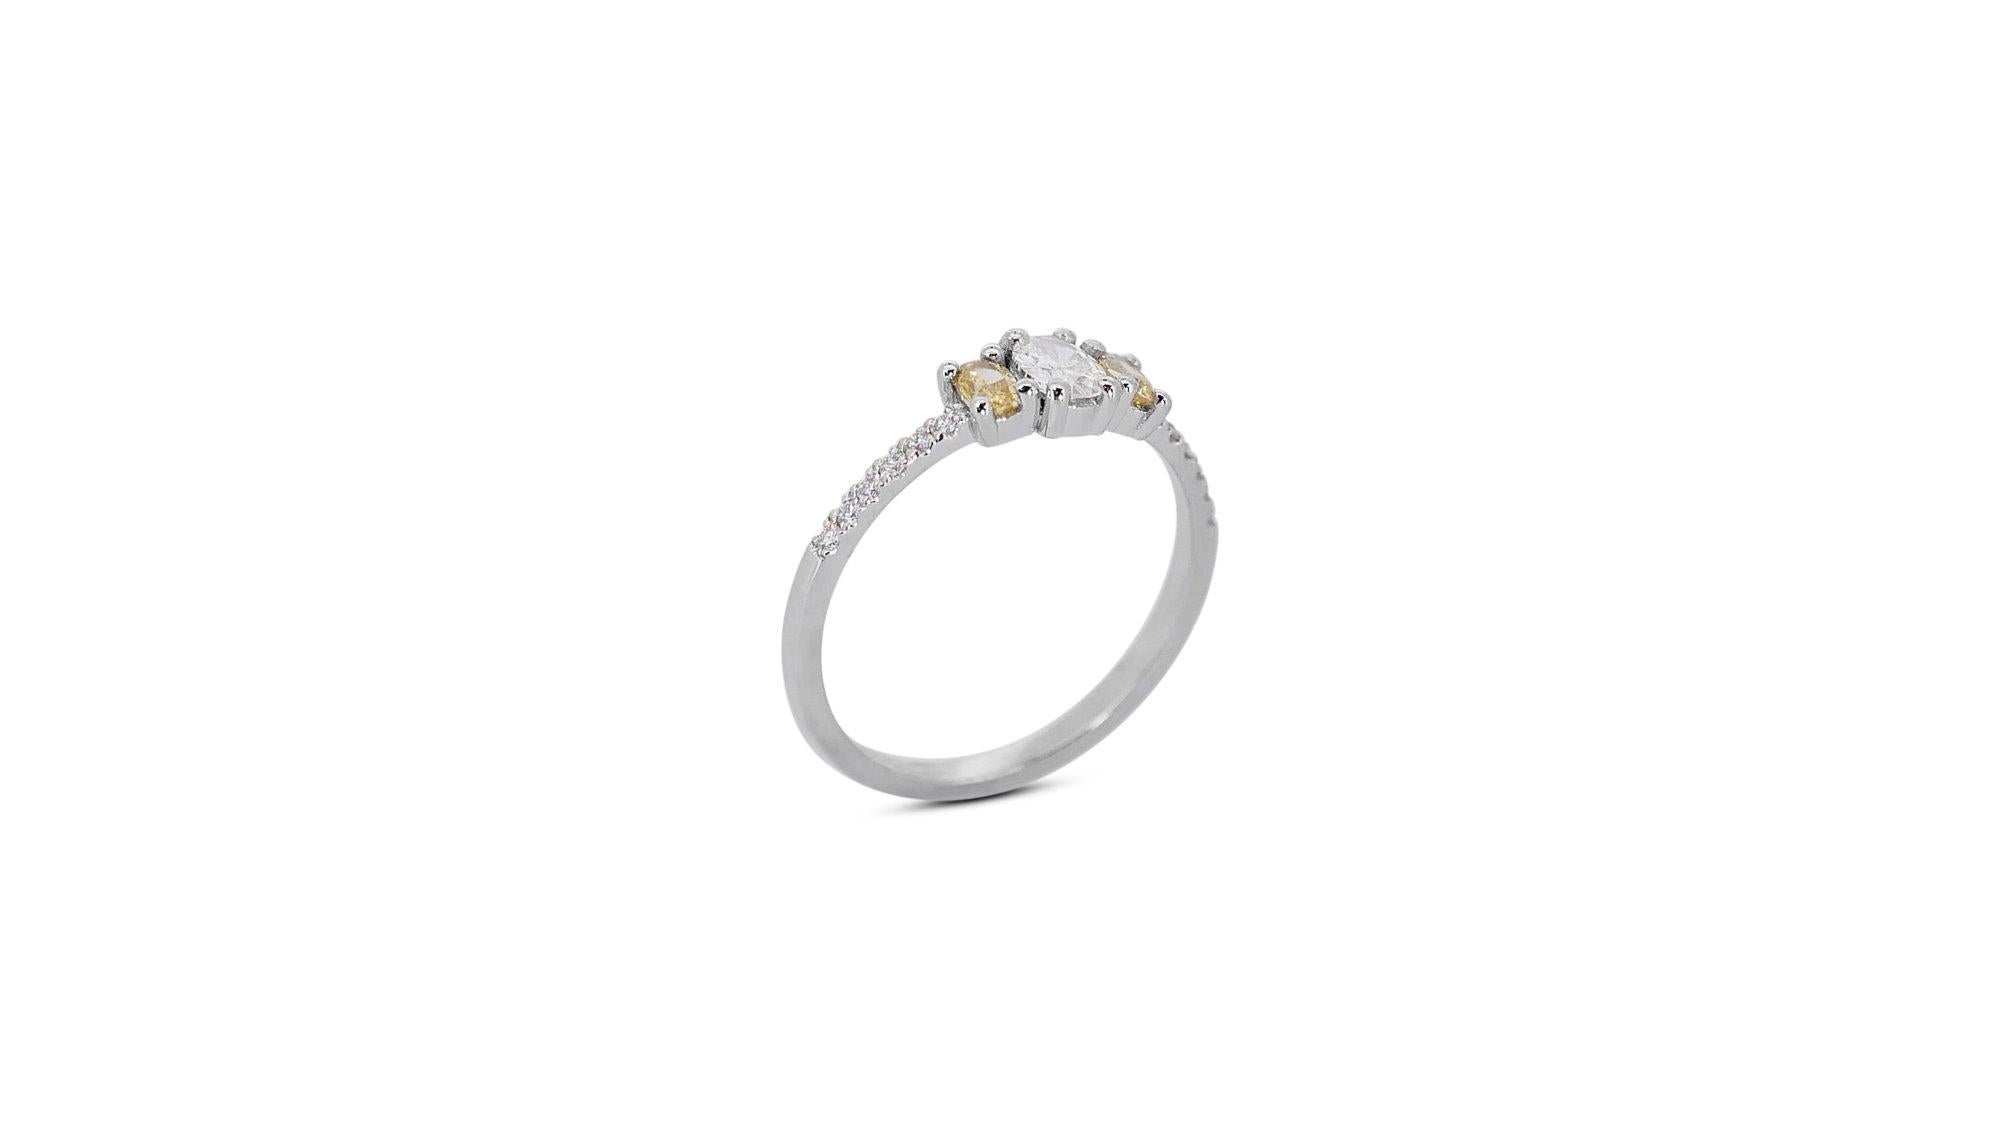 Exquisite 18 kt. White Gold Ring with 0.62 ct Total Natural Diamond - IGI Cert 2